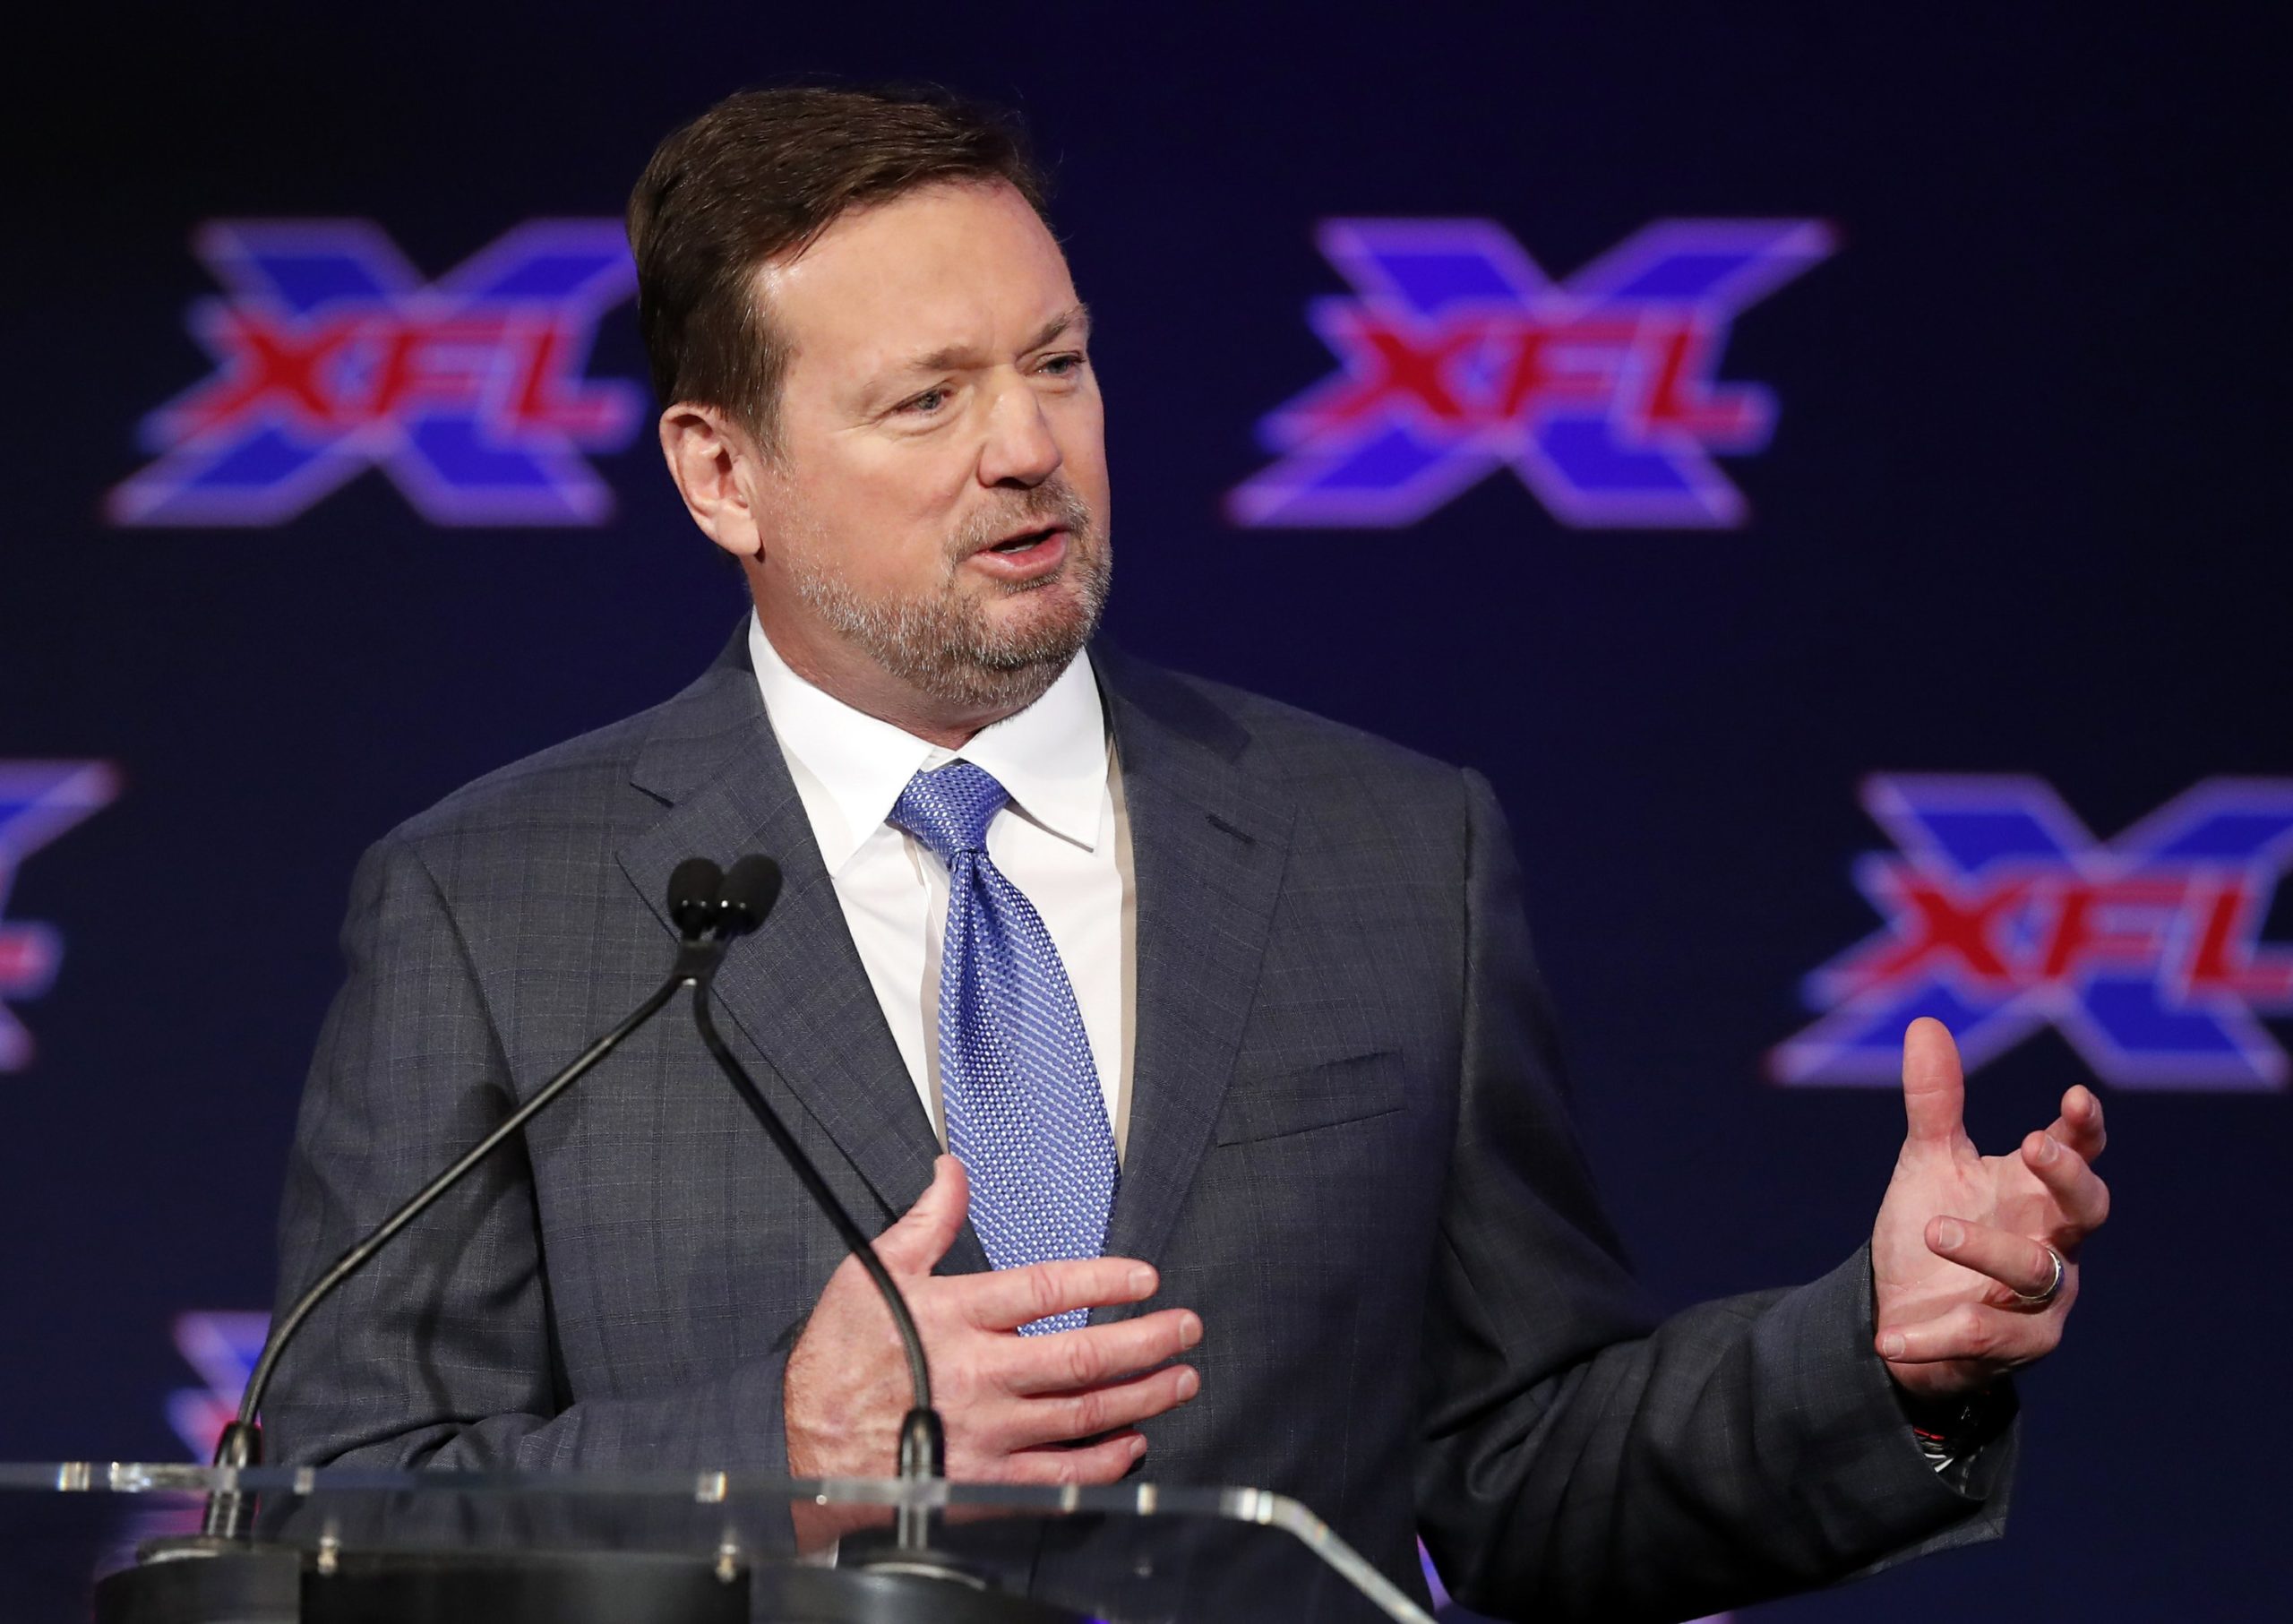 coach bob stoops speaking at a press conference for the xfl